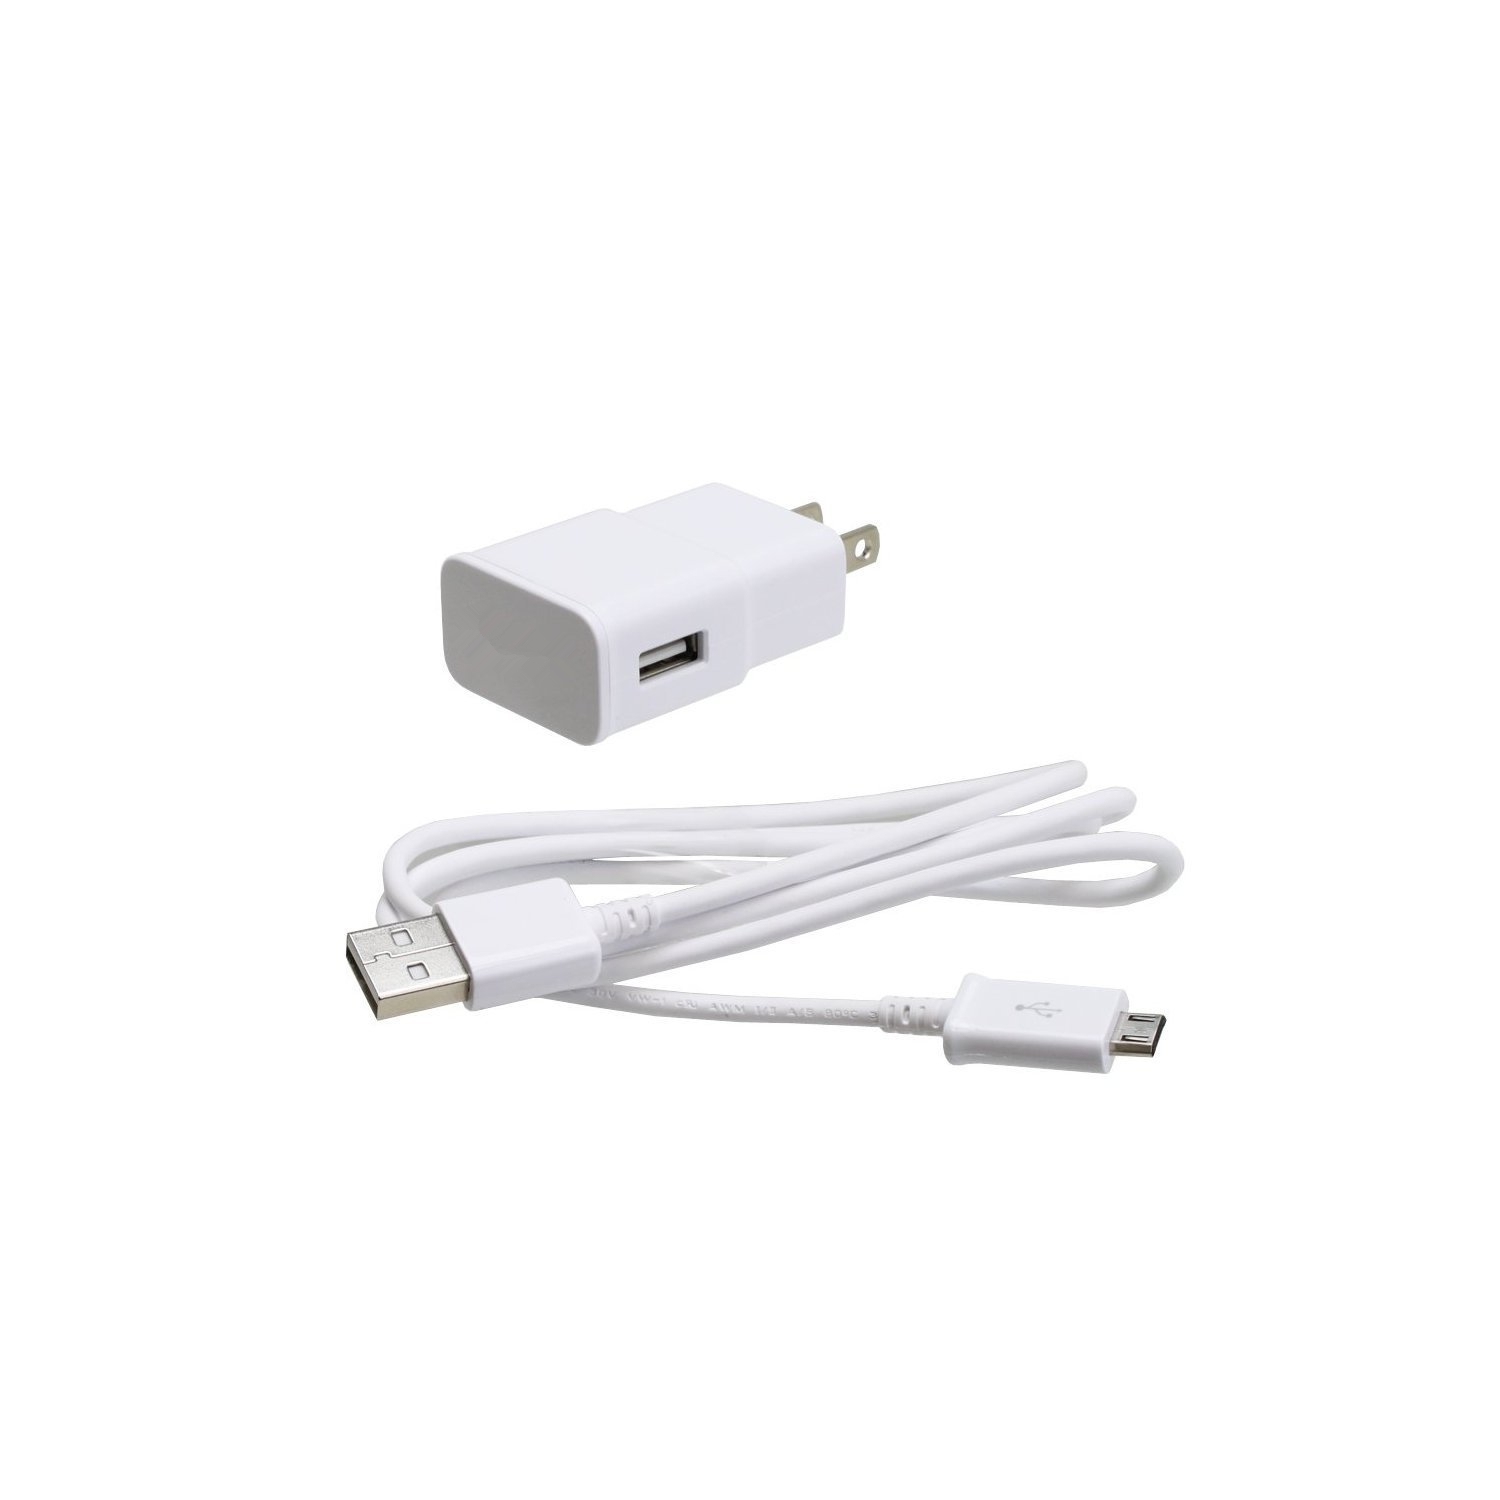 2.0A Travel Power Adapter Wall Charger + 1m Micro USB Cable for Samsung Galaxy S2 S3 S4 Note 2 on5 Grand Prime, White